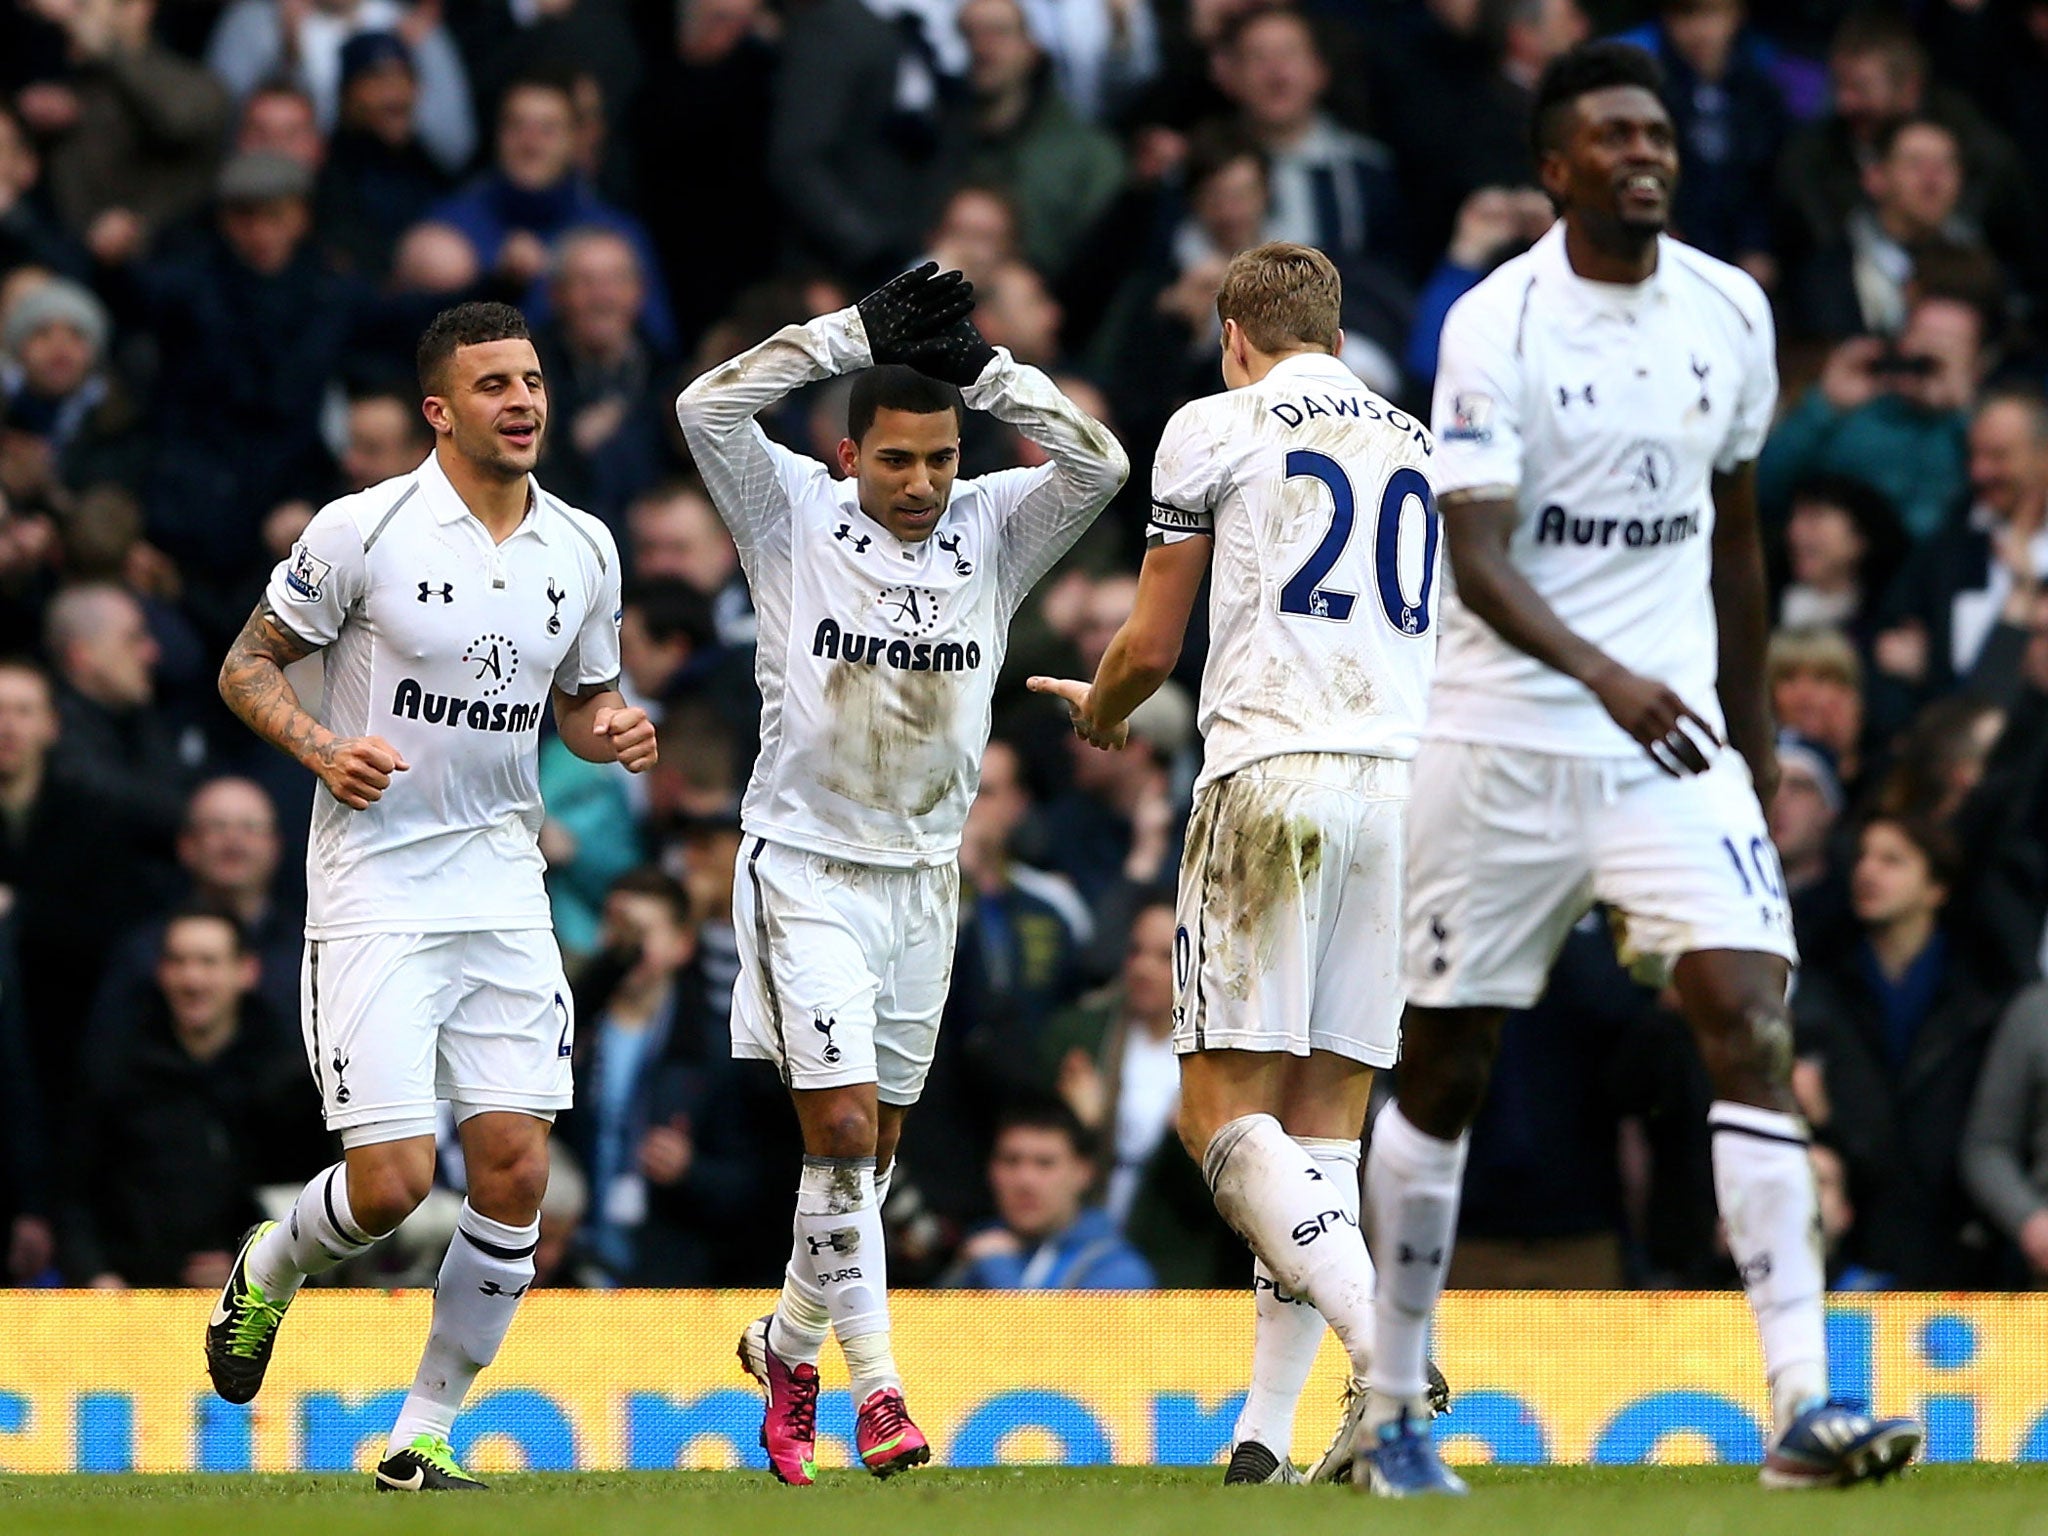 Aaron Lennon of Spurs celebrates with his captain Michael Dawson after scoring his team's second goal